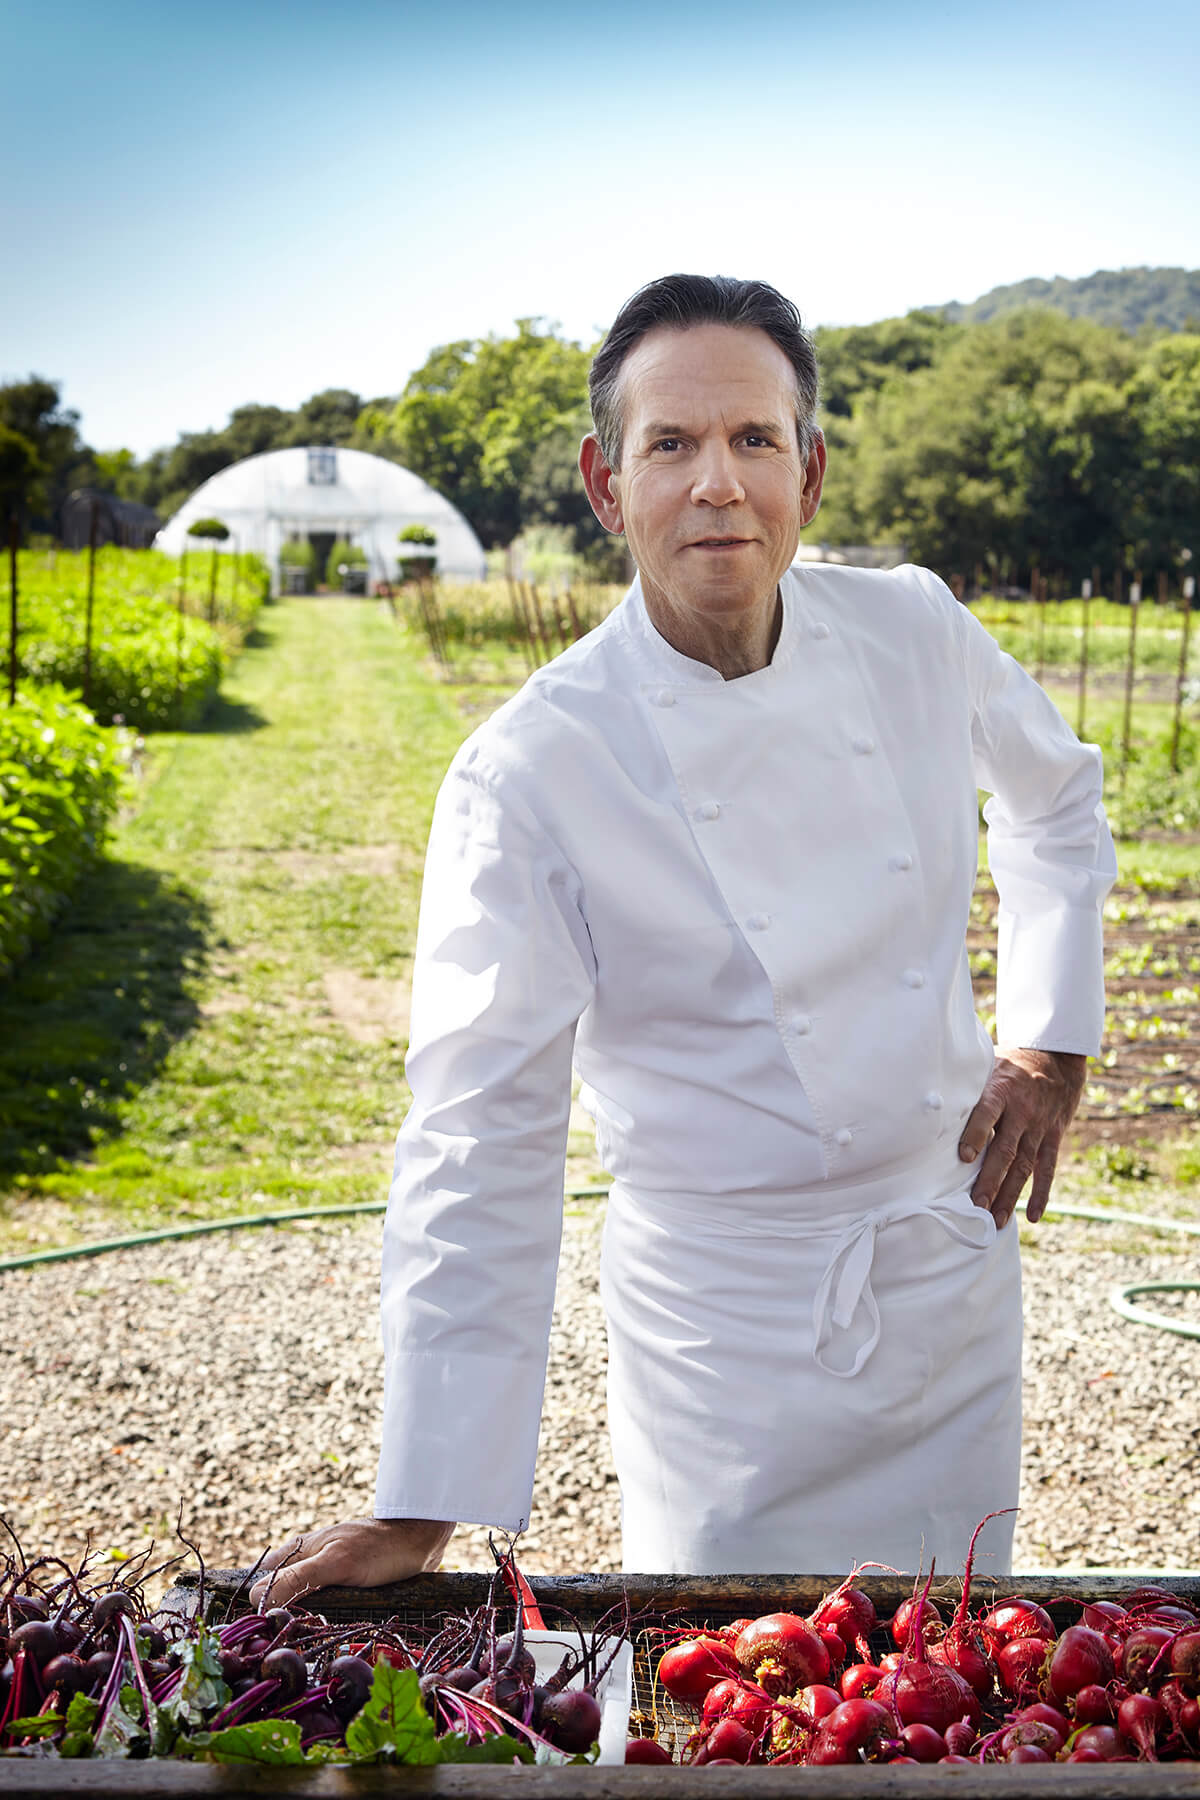 Chef Thomas Keller pictured in the grounds of his famous Napa restaurant The French Laundry